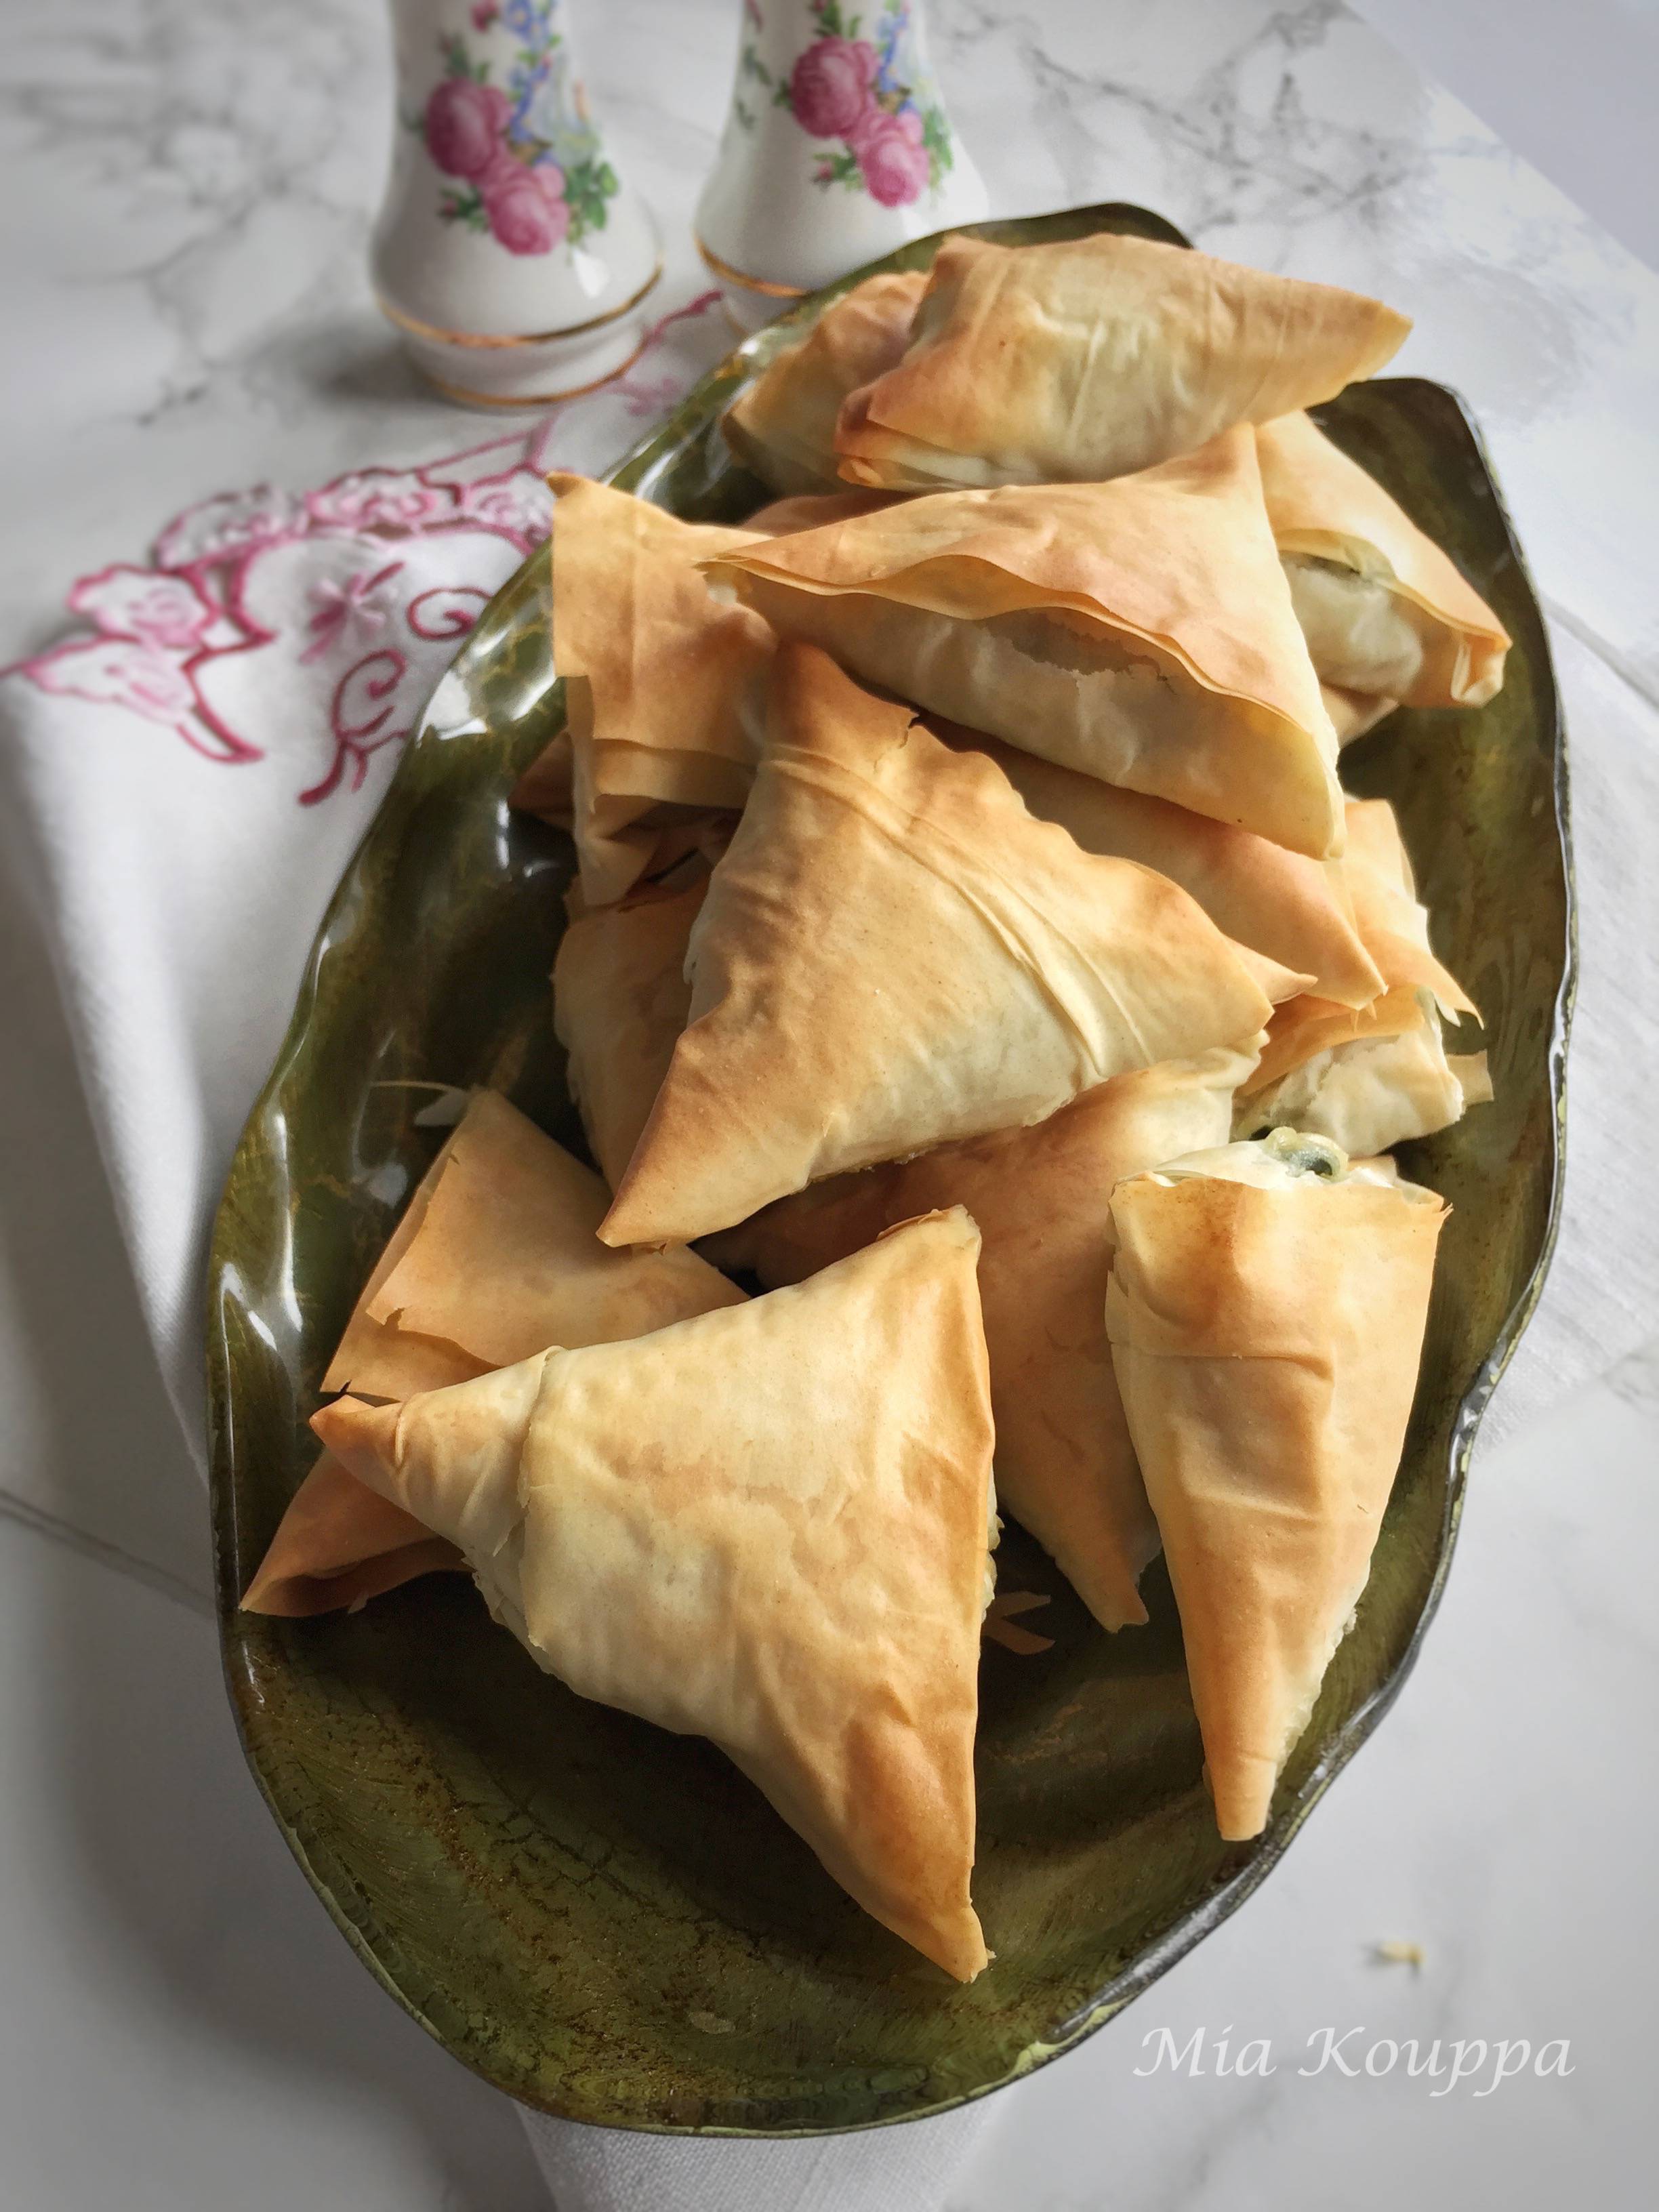 Spanakopita with store bought phyllo (Σπανακόπιτα με αγοραστό φύλλο)